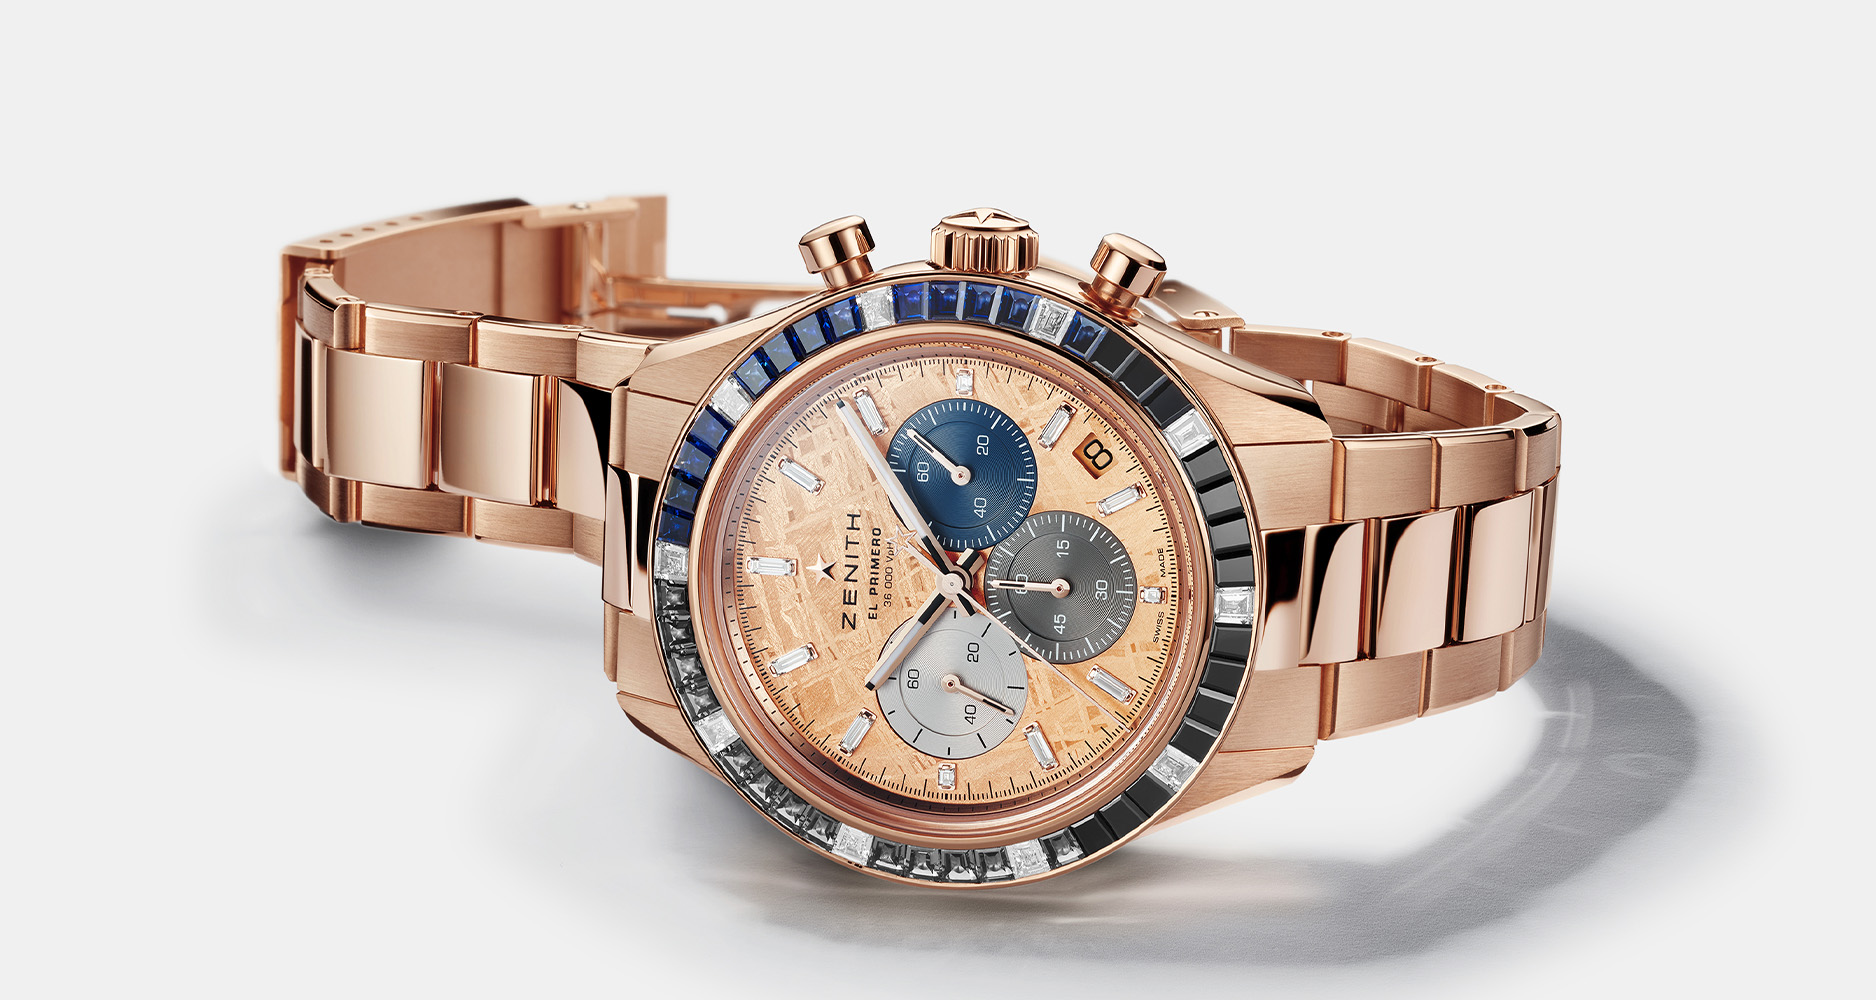 The Zenith Chronomaster Sport in rose gold case and bracelet with meteorite dial and gemset bezel.